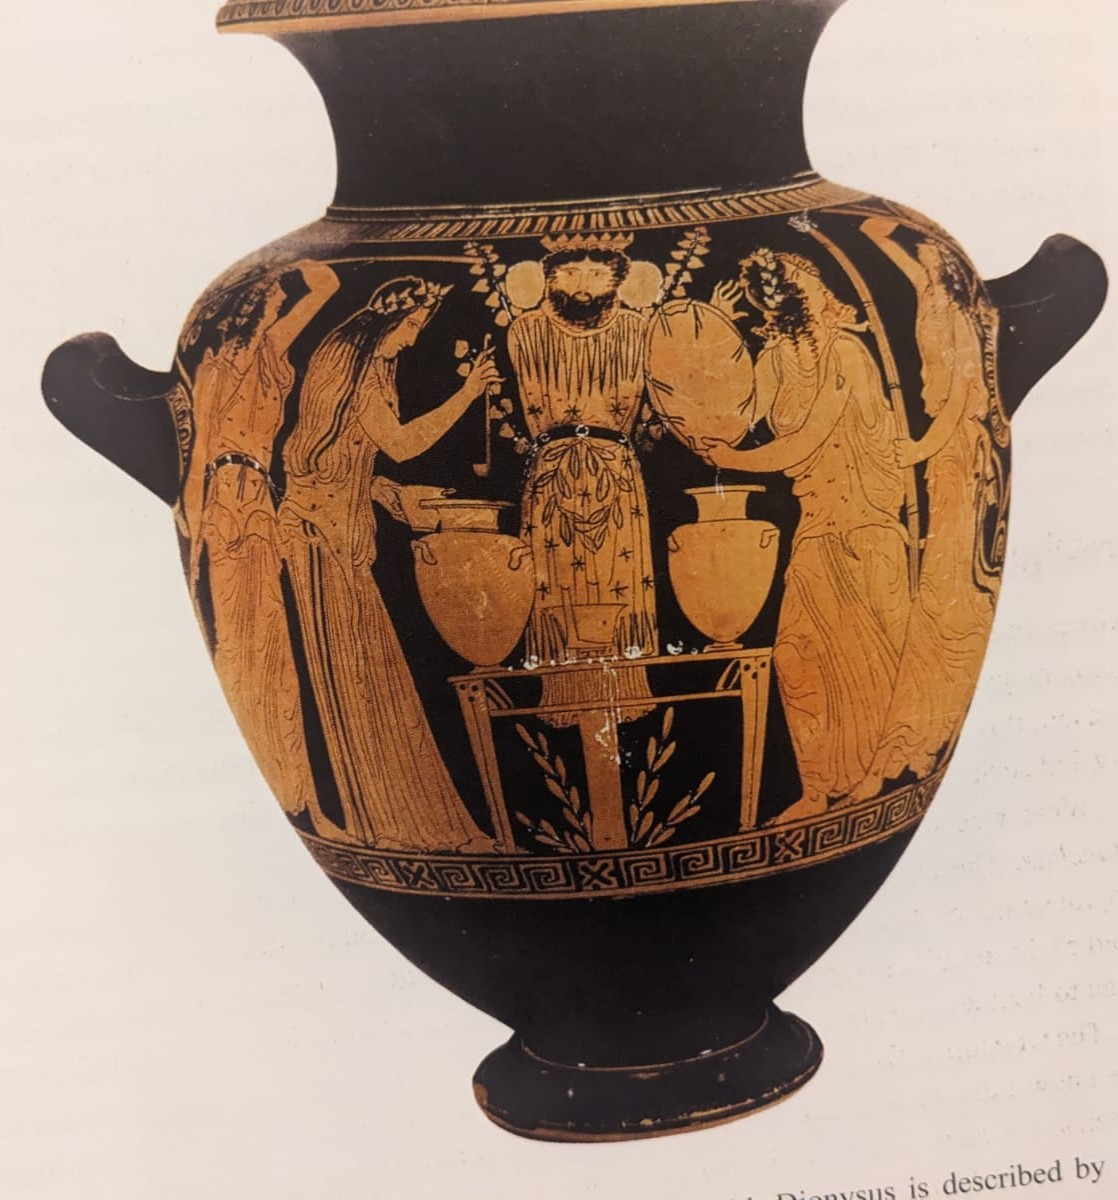 <p>When was the maenad vase made?</p>